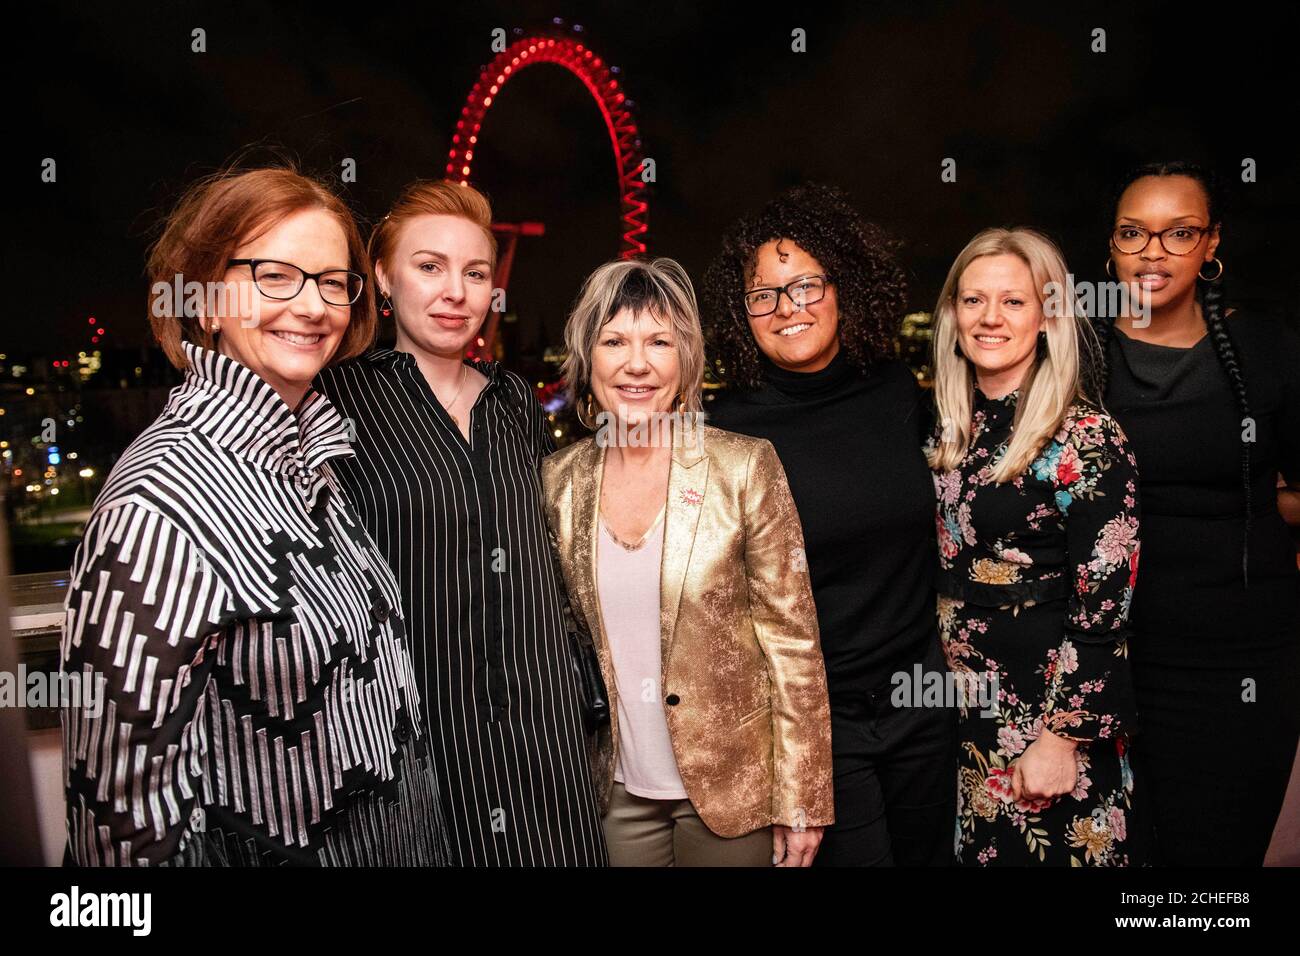 (Left to right) Julia Gillard, former Prime Minister of Australia, Silke Grygier, founder of the Survivor's Collective, Jude Kelly, founder of WOW - Women of the World, Mandu Reid, founder of The Cup Effect, Jemma Read, Head of Philanthropy at Bloomberg and activist Nimco Ali at an event to launch The WOW Foundation and announce Bloomberg as the first Global Founding Partner ahead of WOW - Women of the World Festival 2019, London. Stock Photo